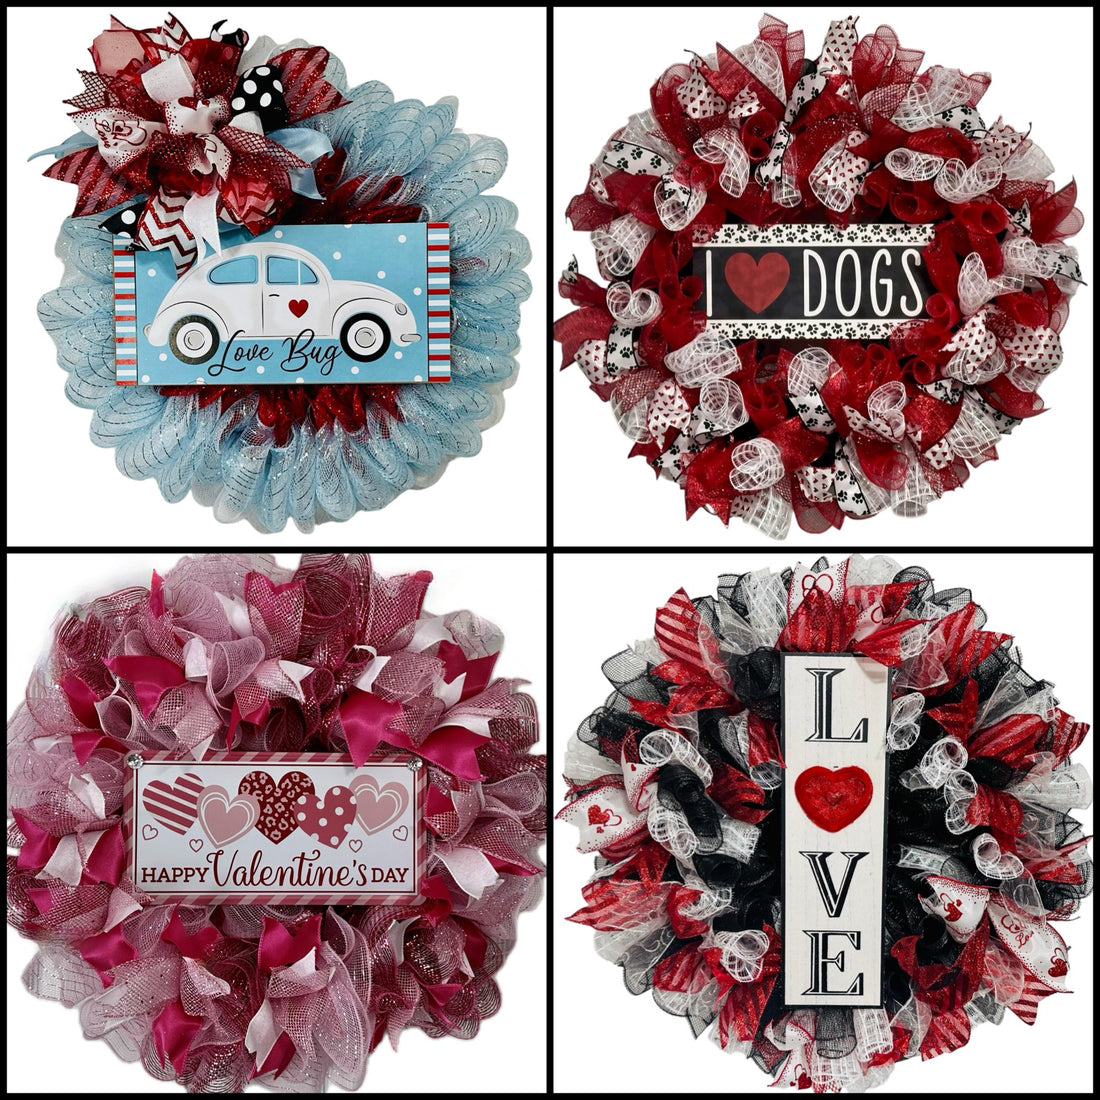 Introducing Wreaths by Adore Wreaths!